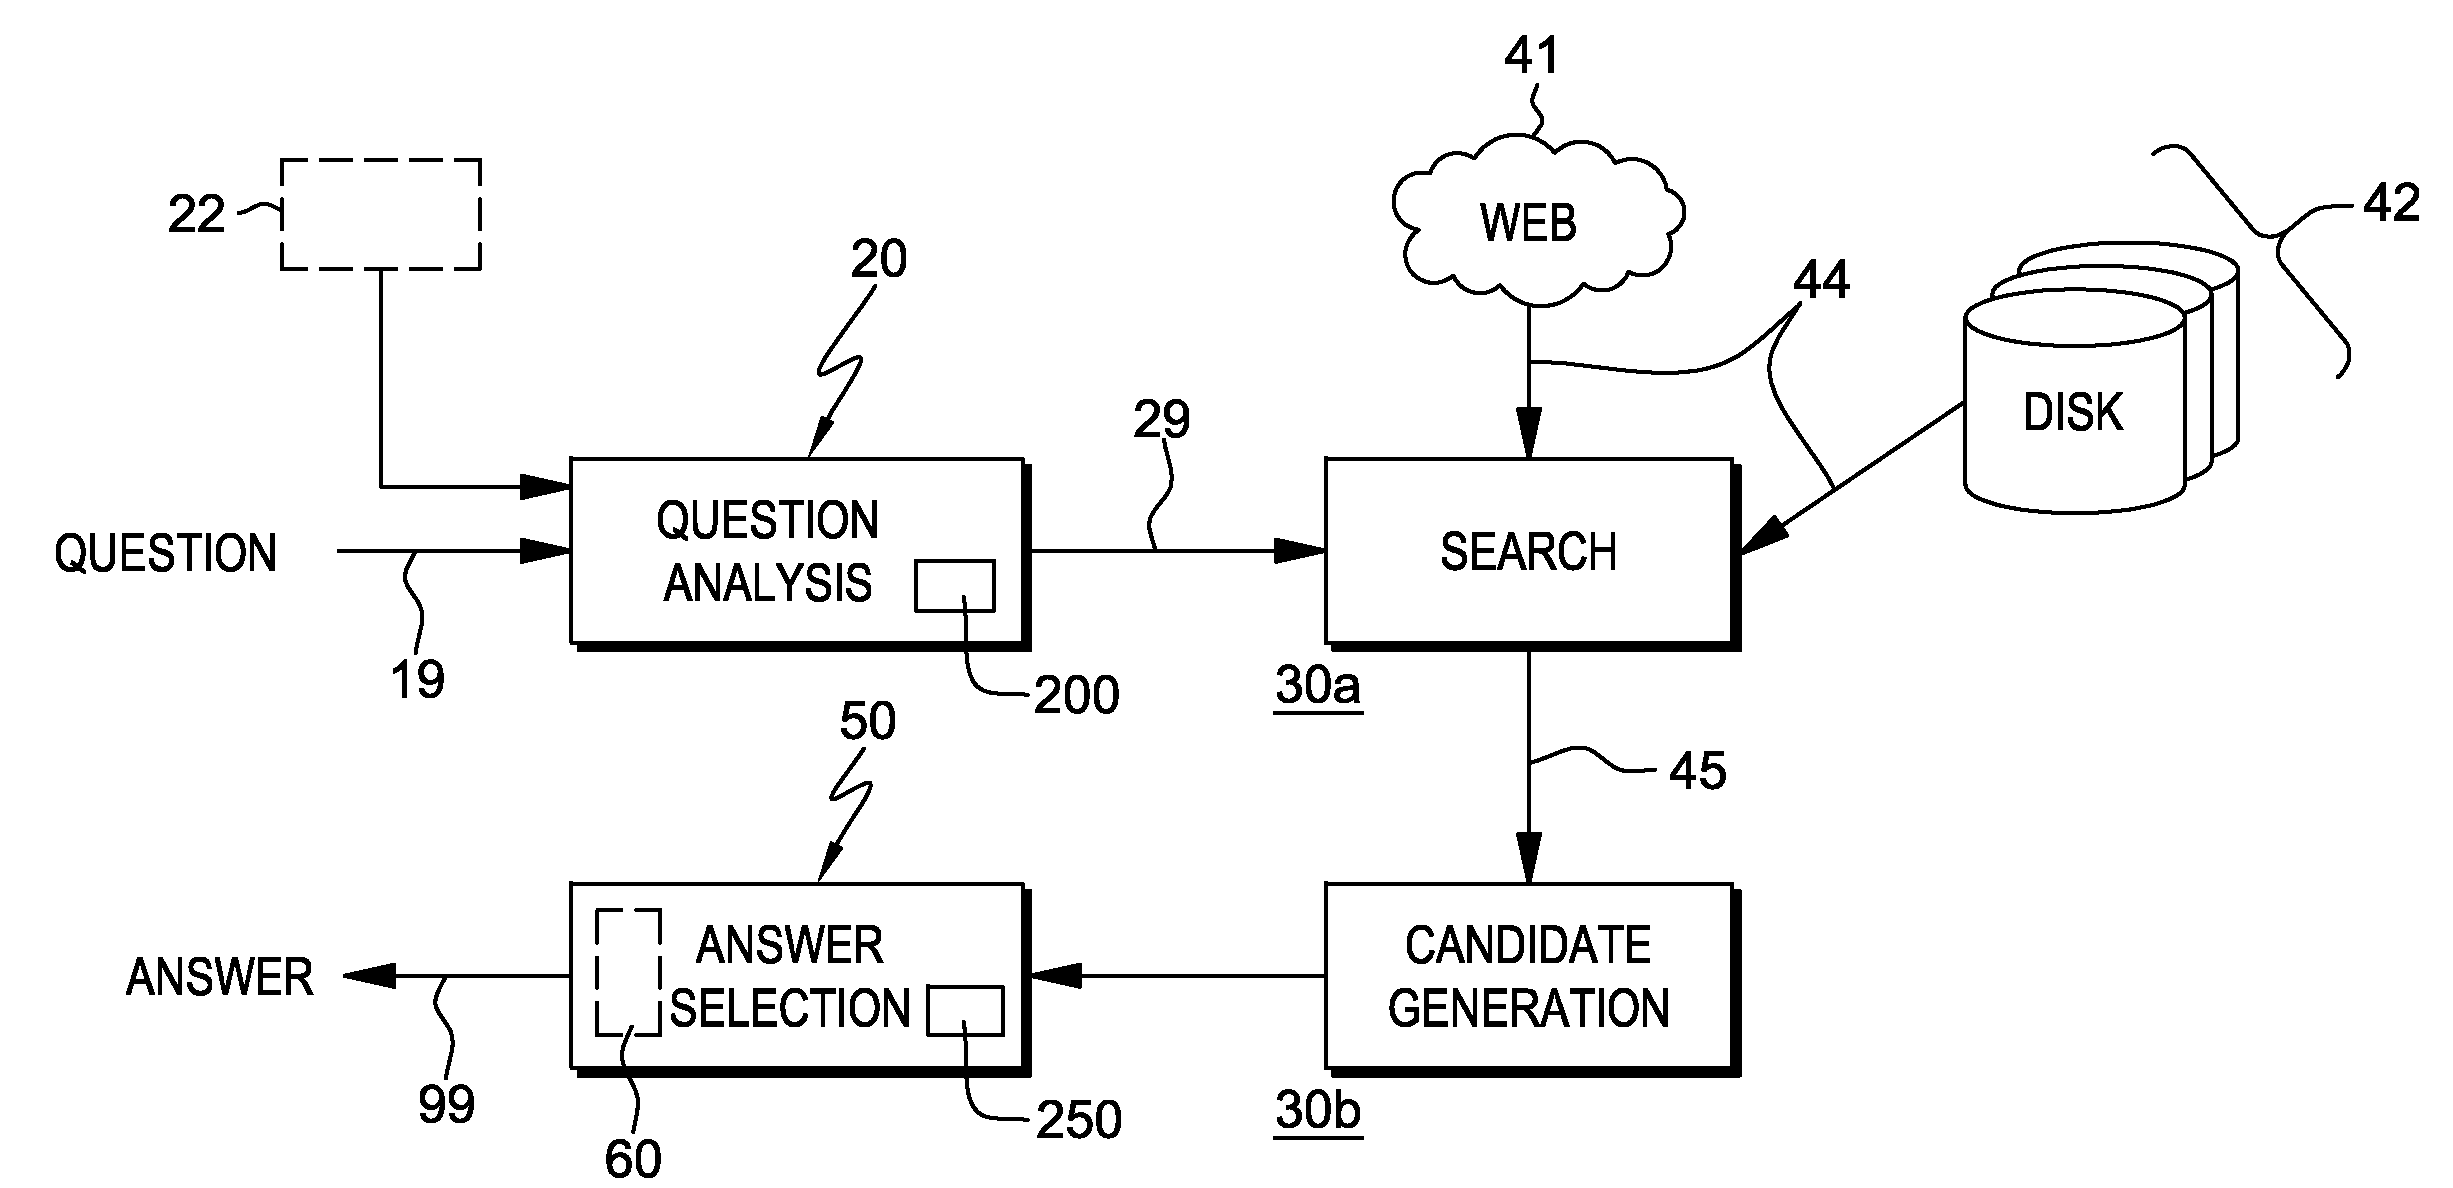 Scoring candidates using structural information in semi-structured documents for question answering systems